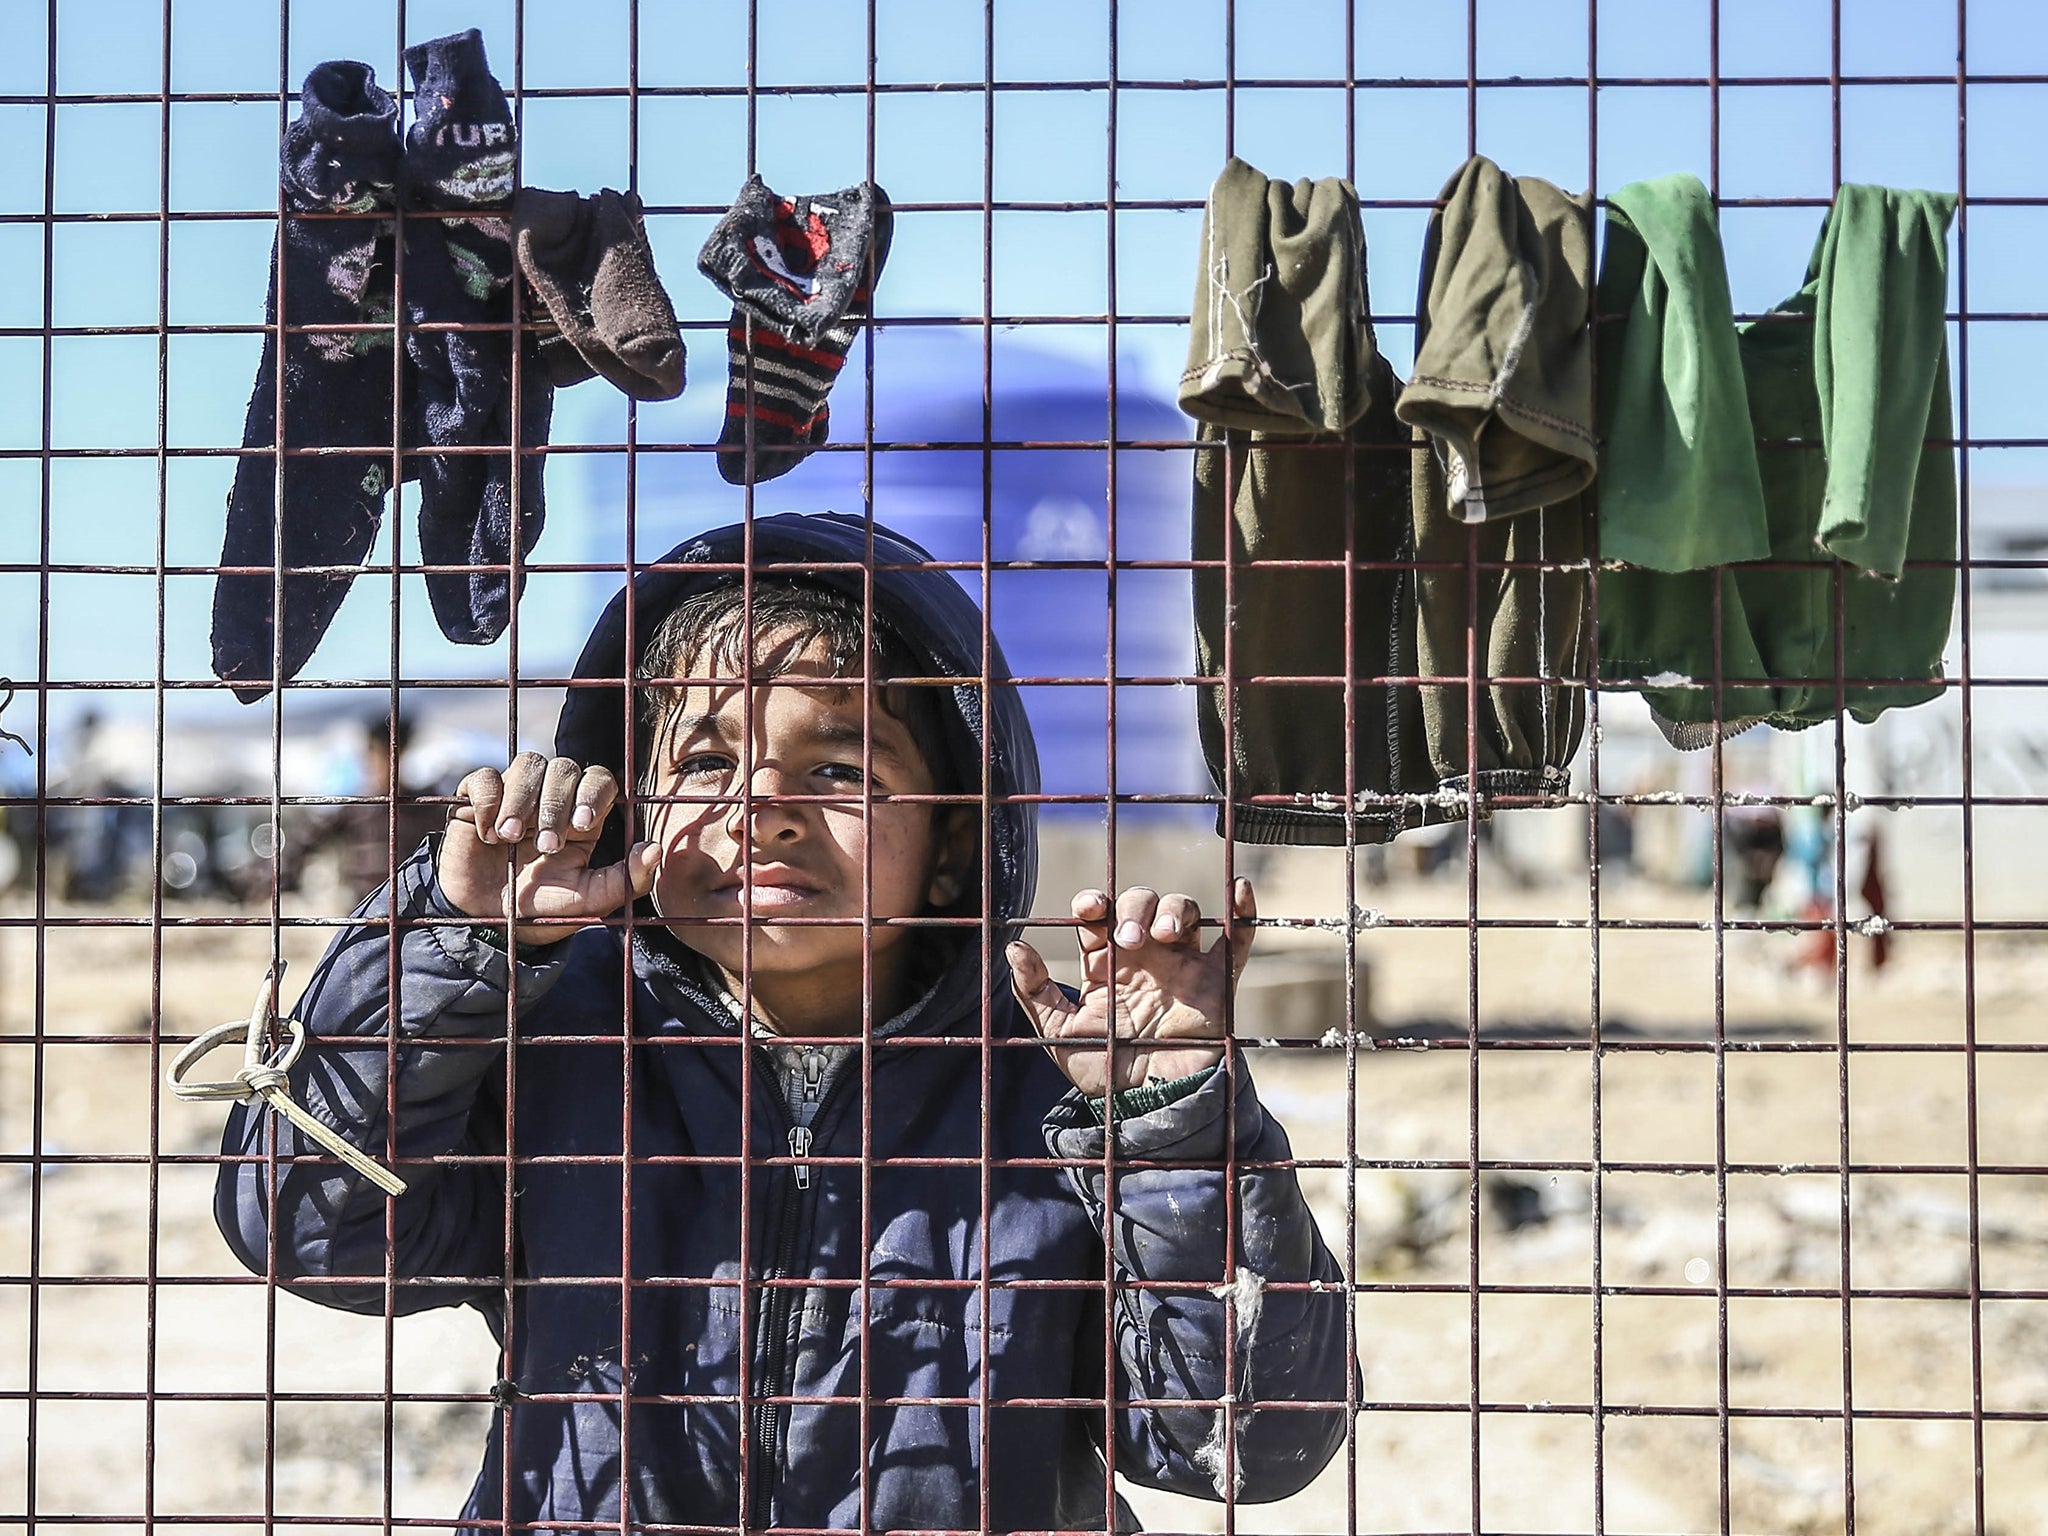 Syrians who have fled the attacks congregate at the Bab al-Salama crossing on the Turkish-Syrian border (Getty)